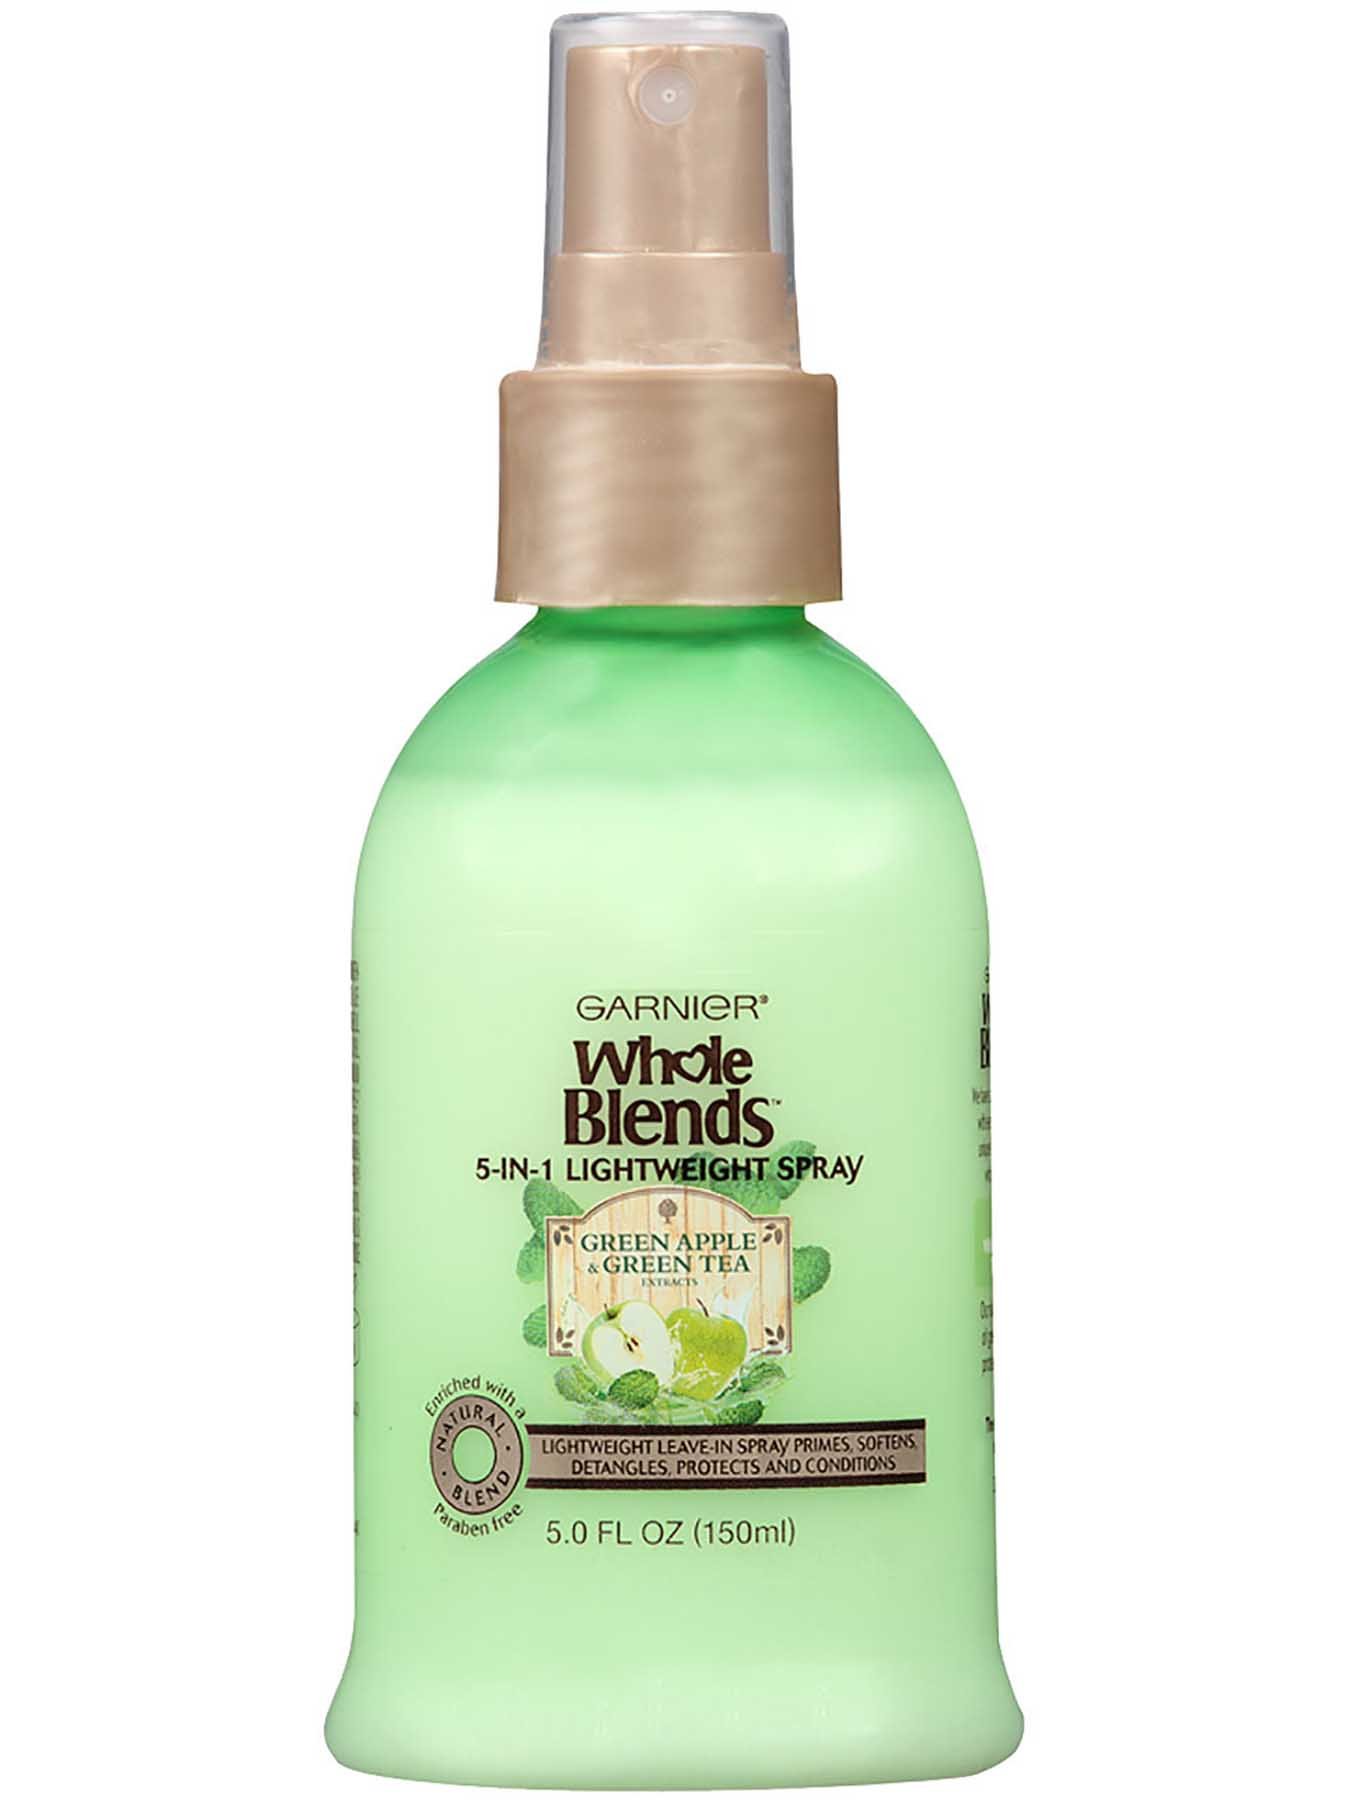 Front view of Refreshing 5-in-1 Lightweight Spray with Green Apple and Green Tea Extracts.